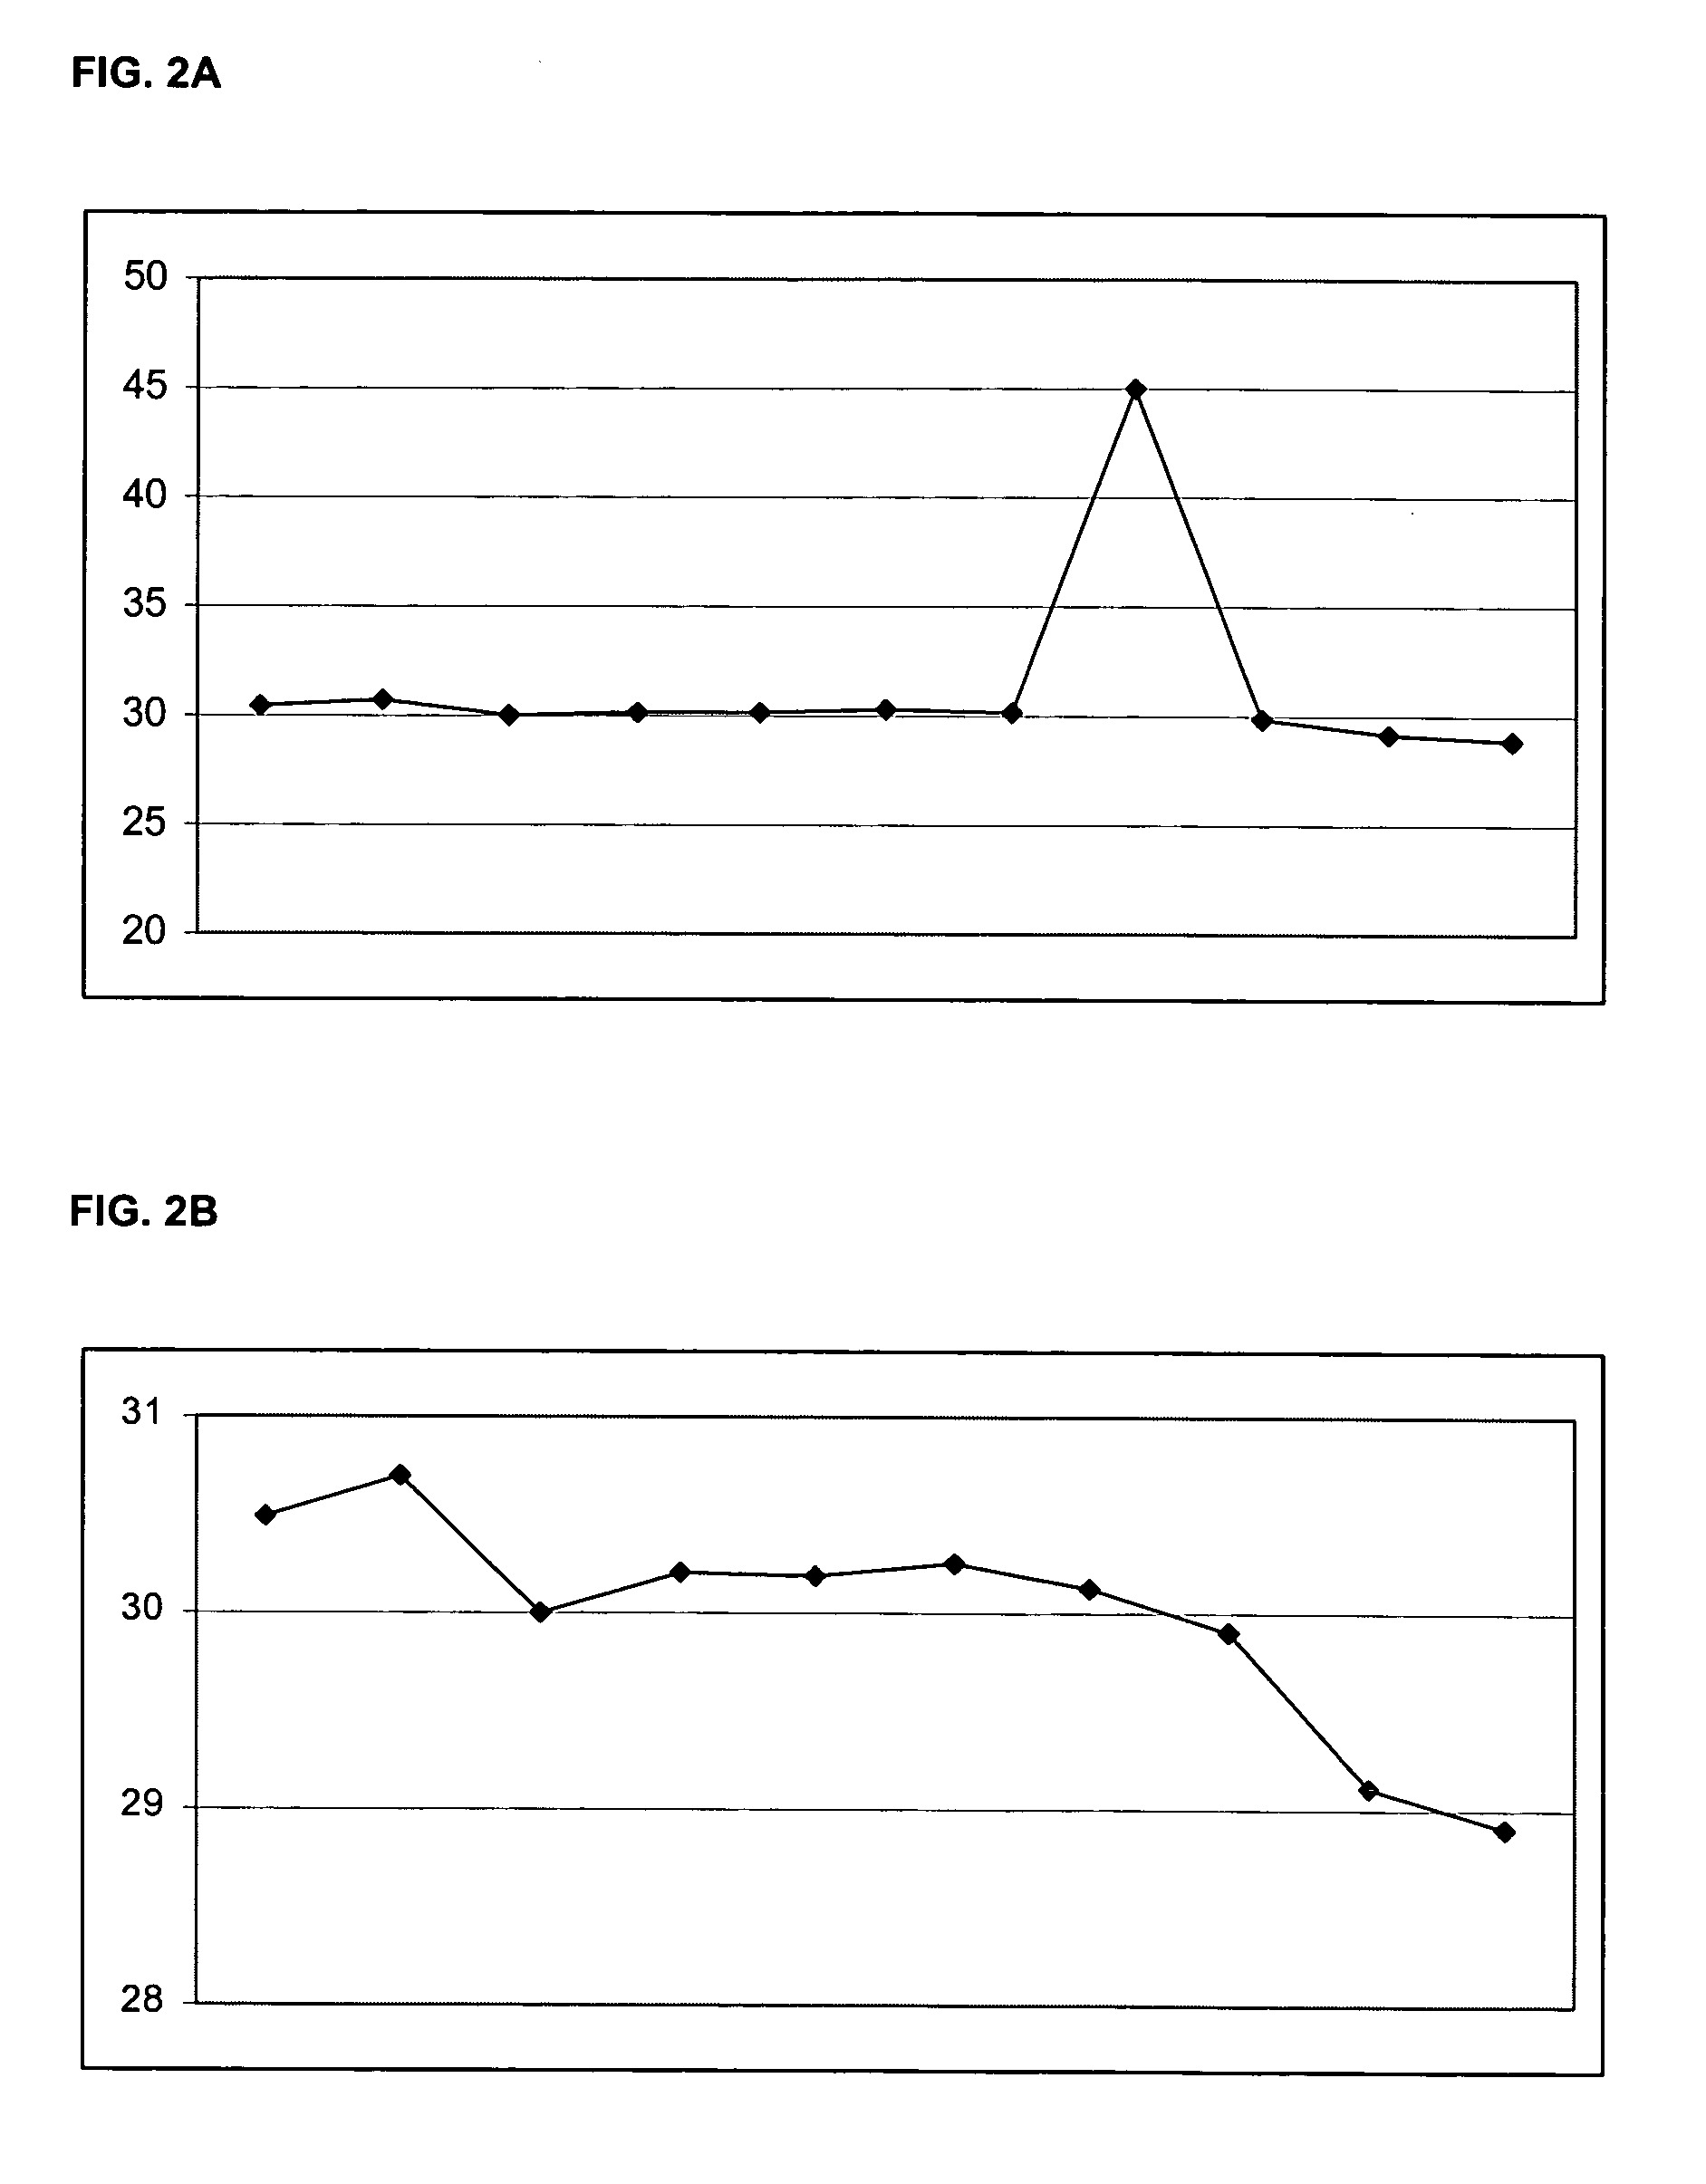 Spike filter for financial data represented as discrete-valued time series